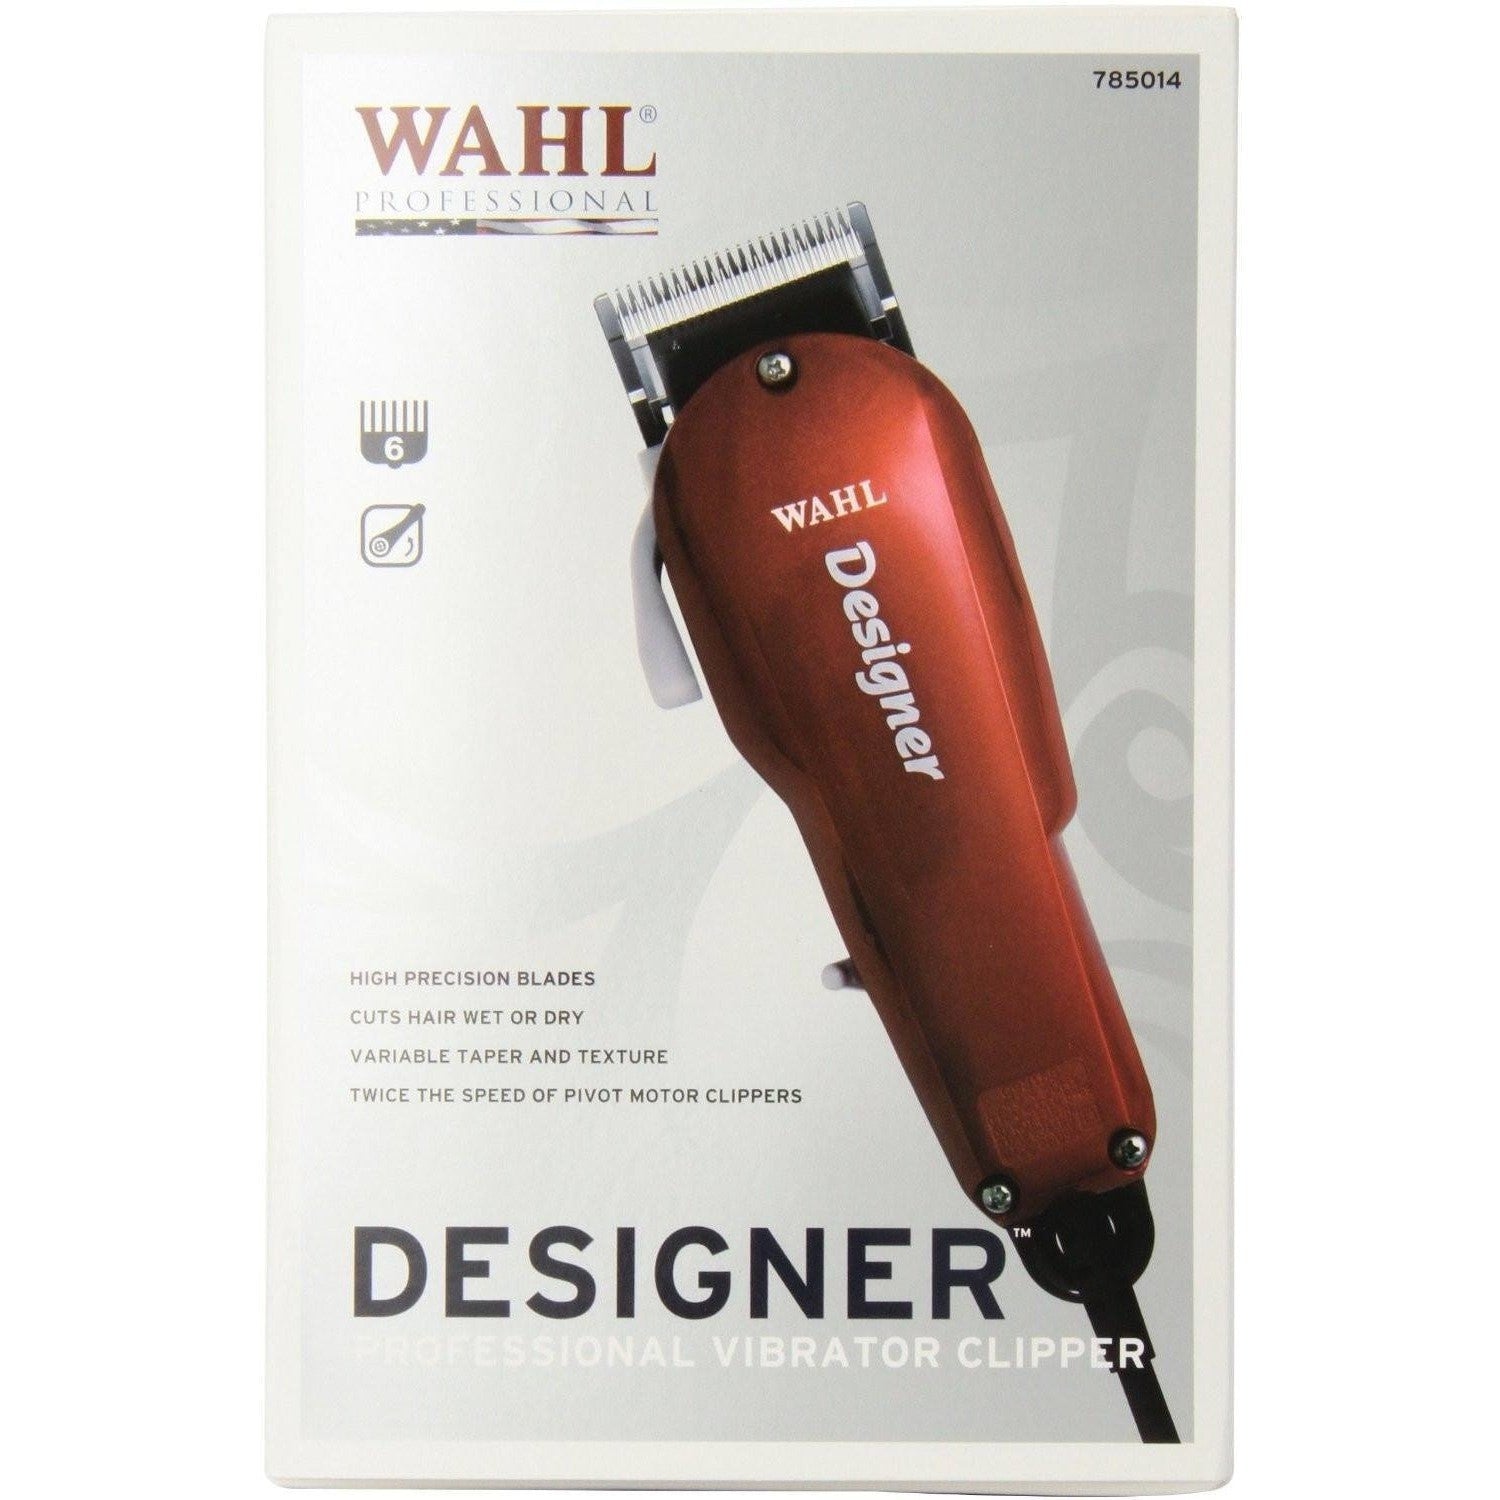 wahl designer clippers review